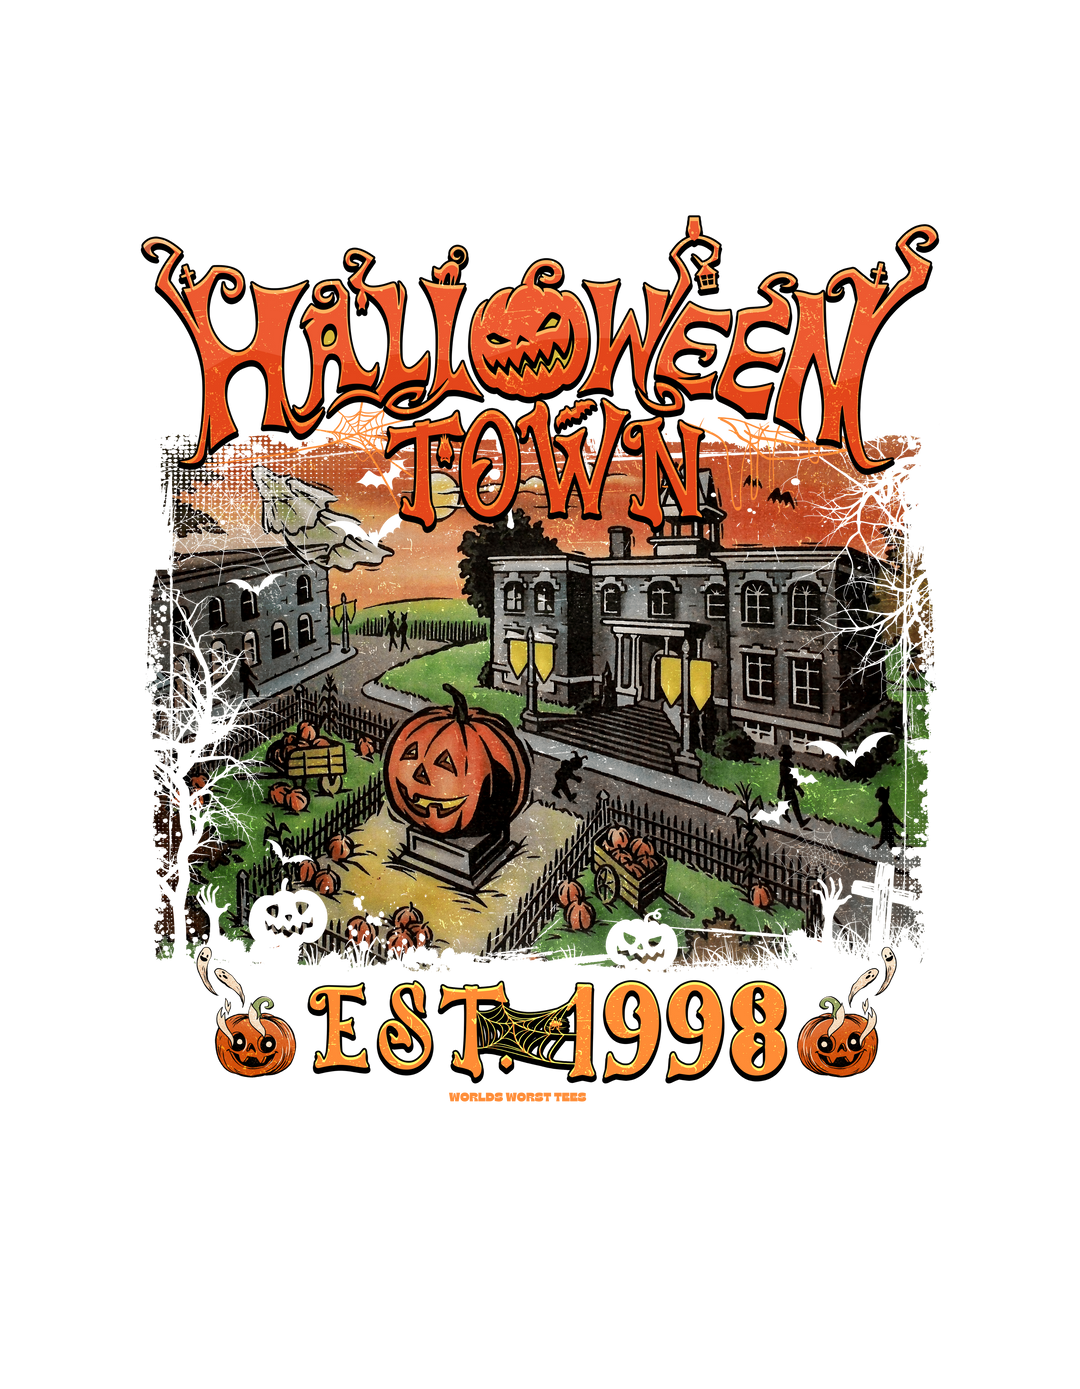 A Halloween-themed toddler long sleeve tee featuring a graphic of a house, pumpkins, bats, and spiders. Made of 100% combed ringspun cotton for durability and comfort. From Worlds Worst Tees.